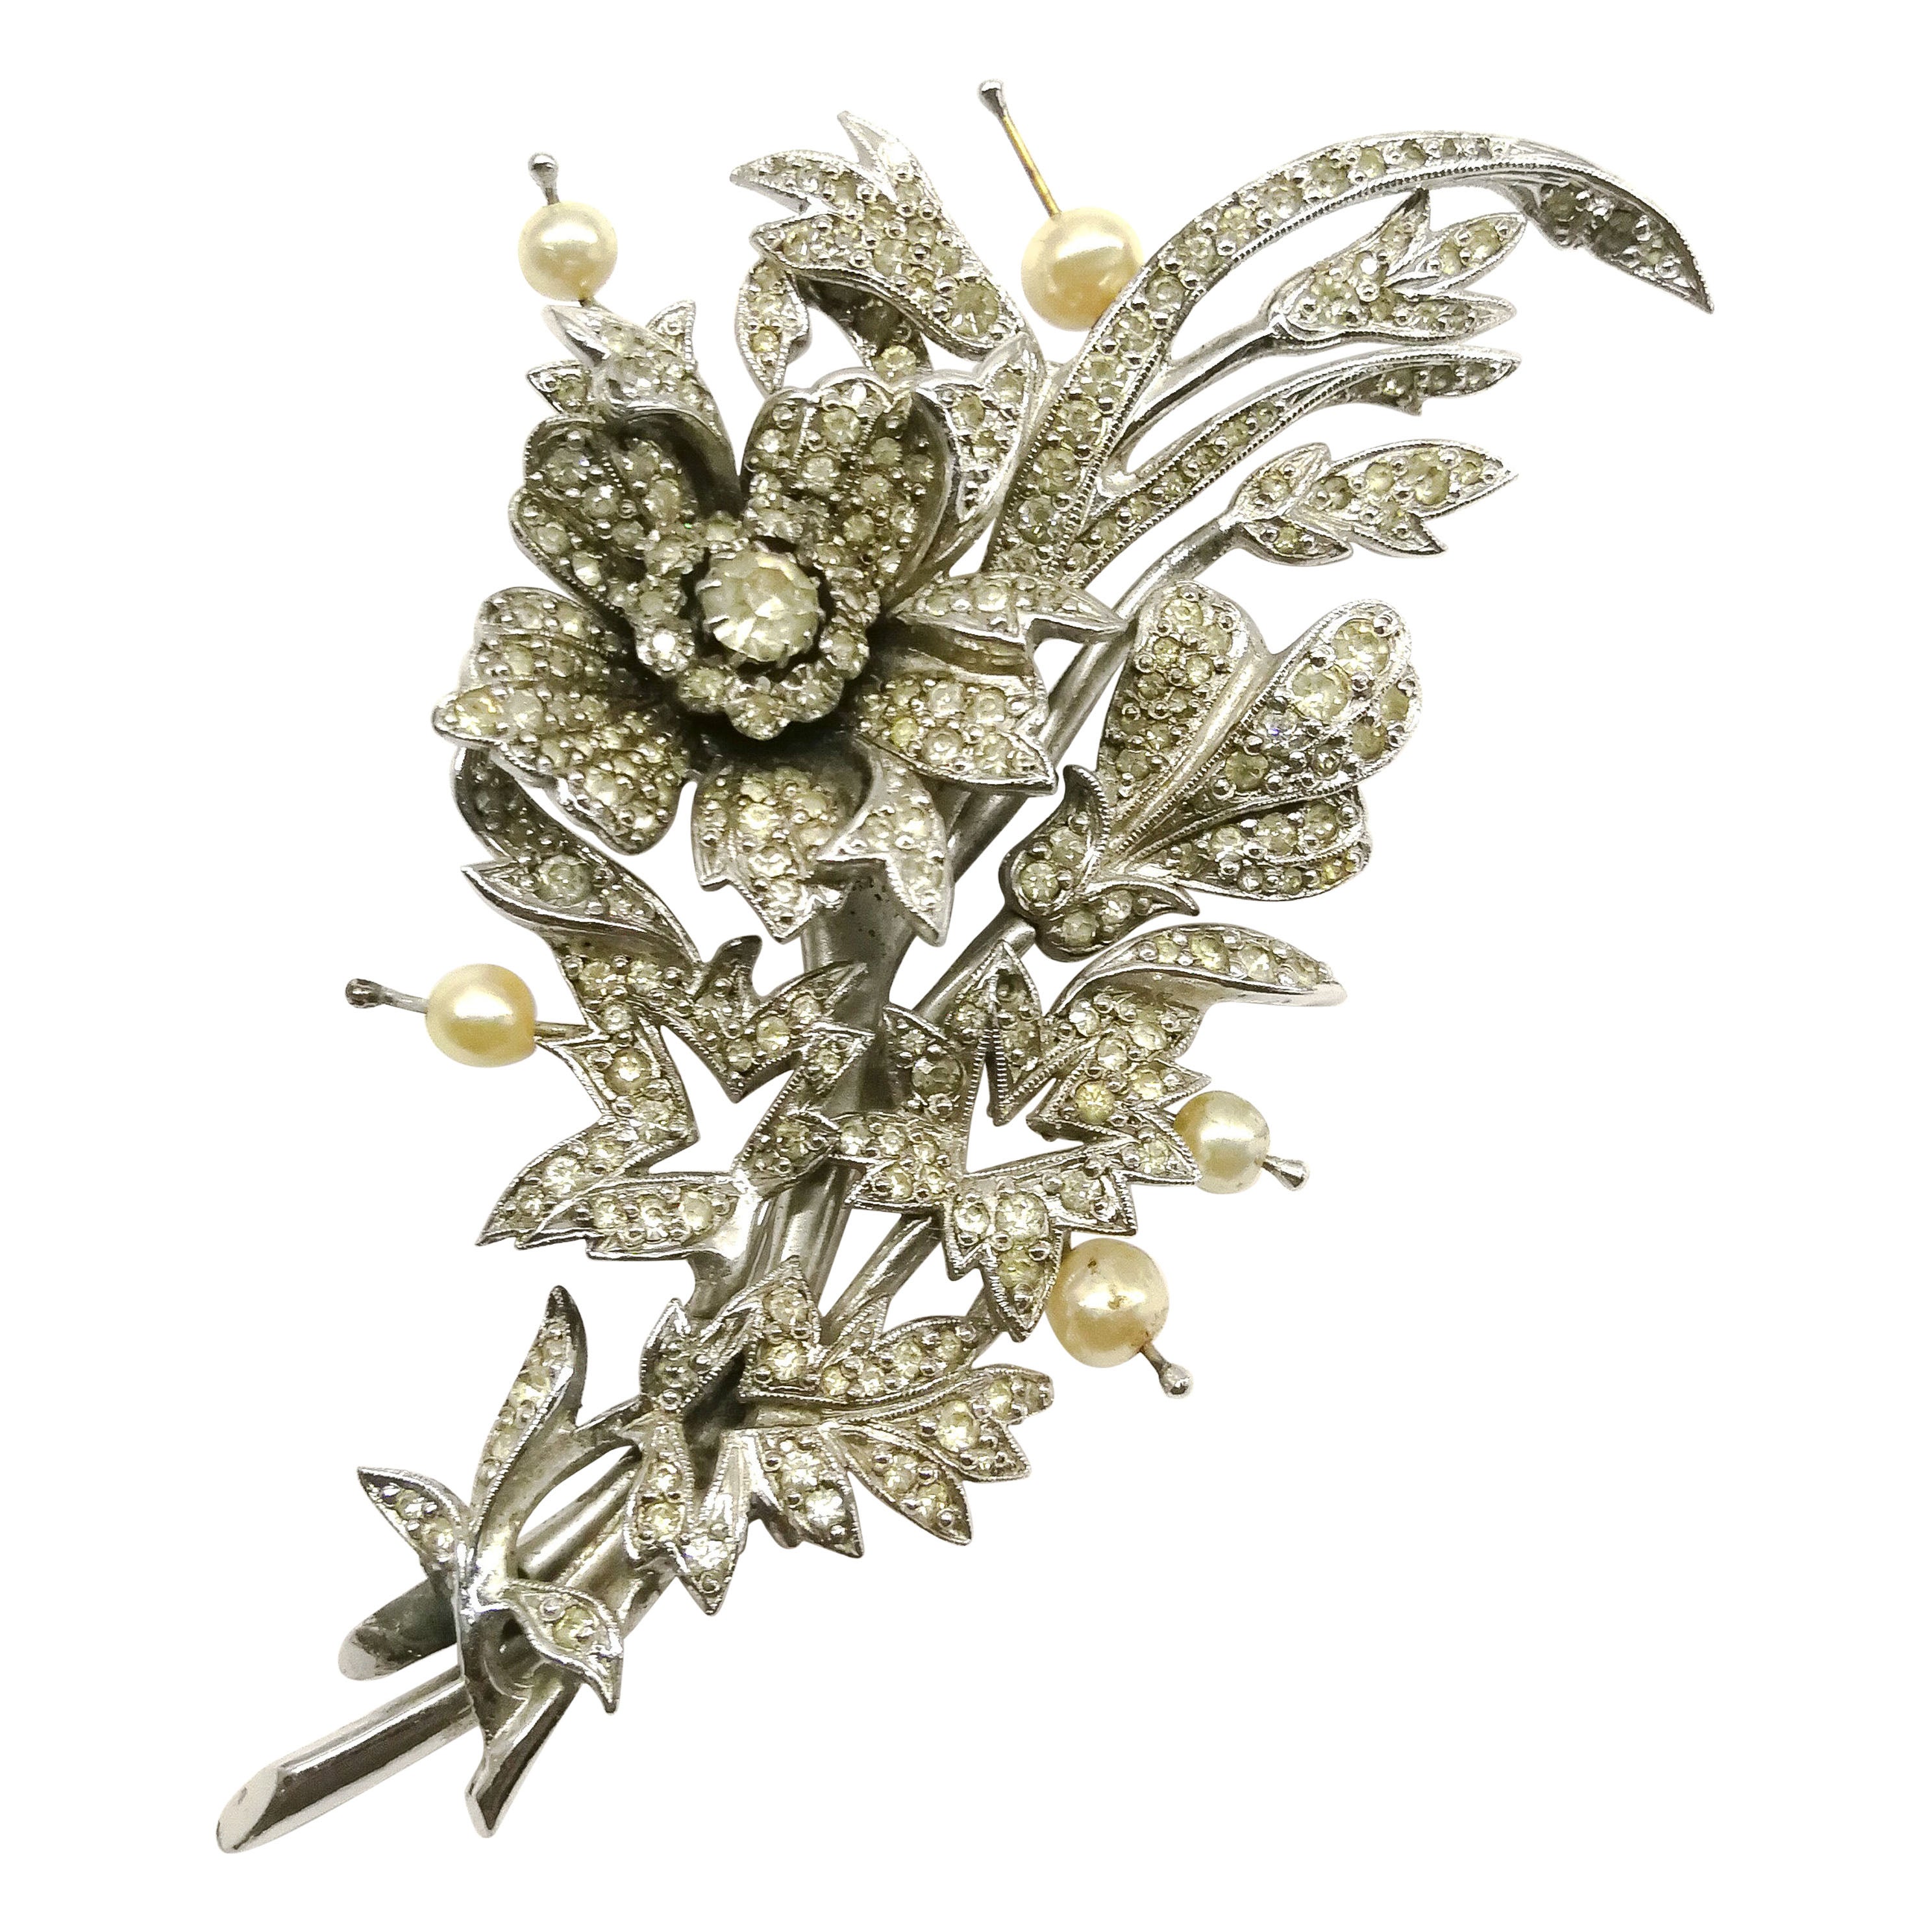 A very large paste 'en tremblant' brooch, Christian Dior by Mitchel Maer 1950s